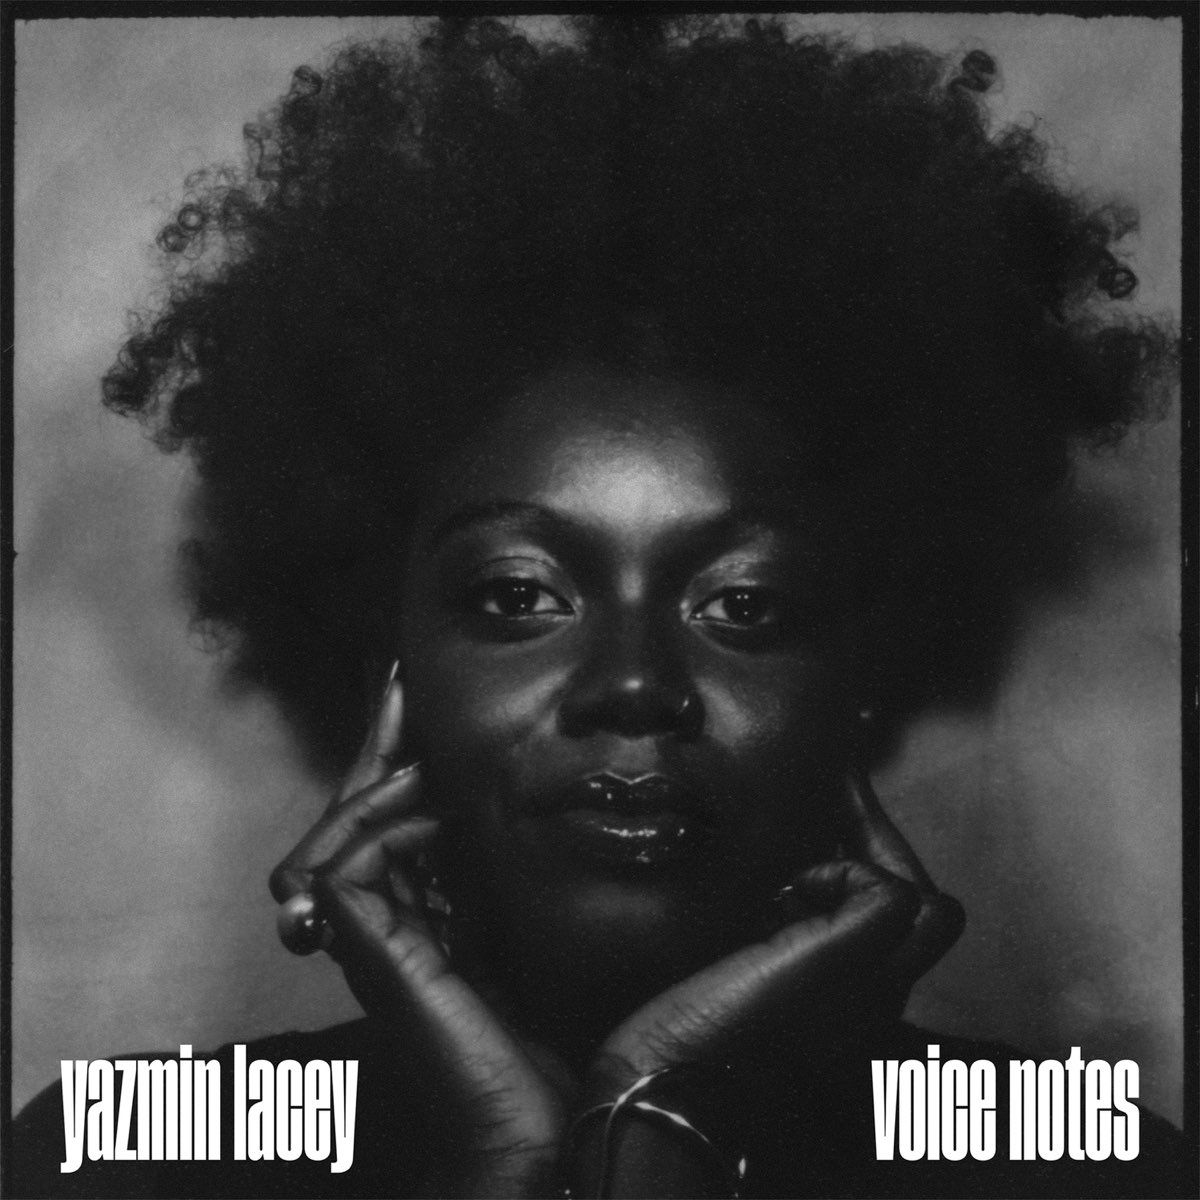 #YazminLacey’s ‘Voice Notes’ is featured in our list of the 50 BEST ALBUMS OF 2023 | Explore the complete list here: album.ink/BestAlbums23 @Yazmin_Lacey